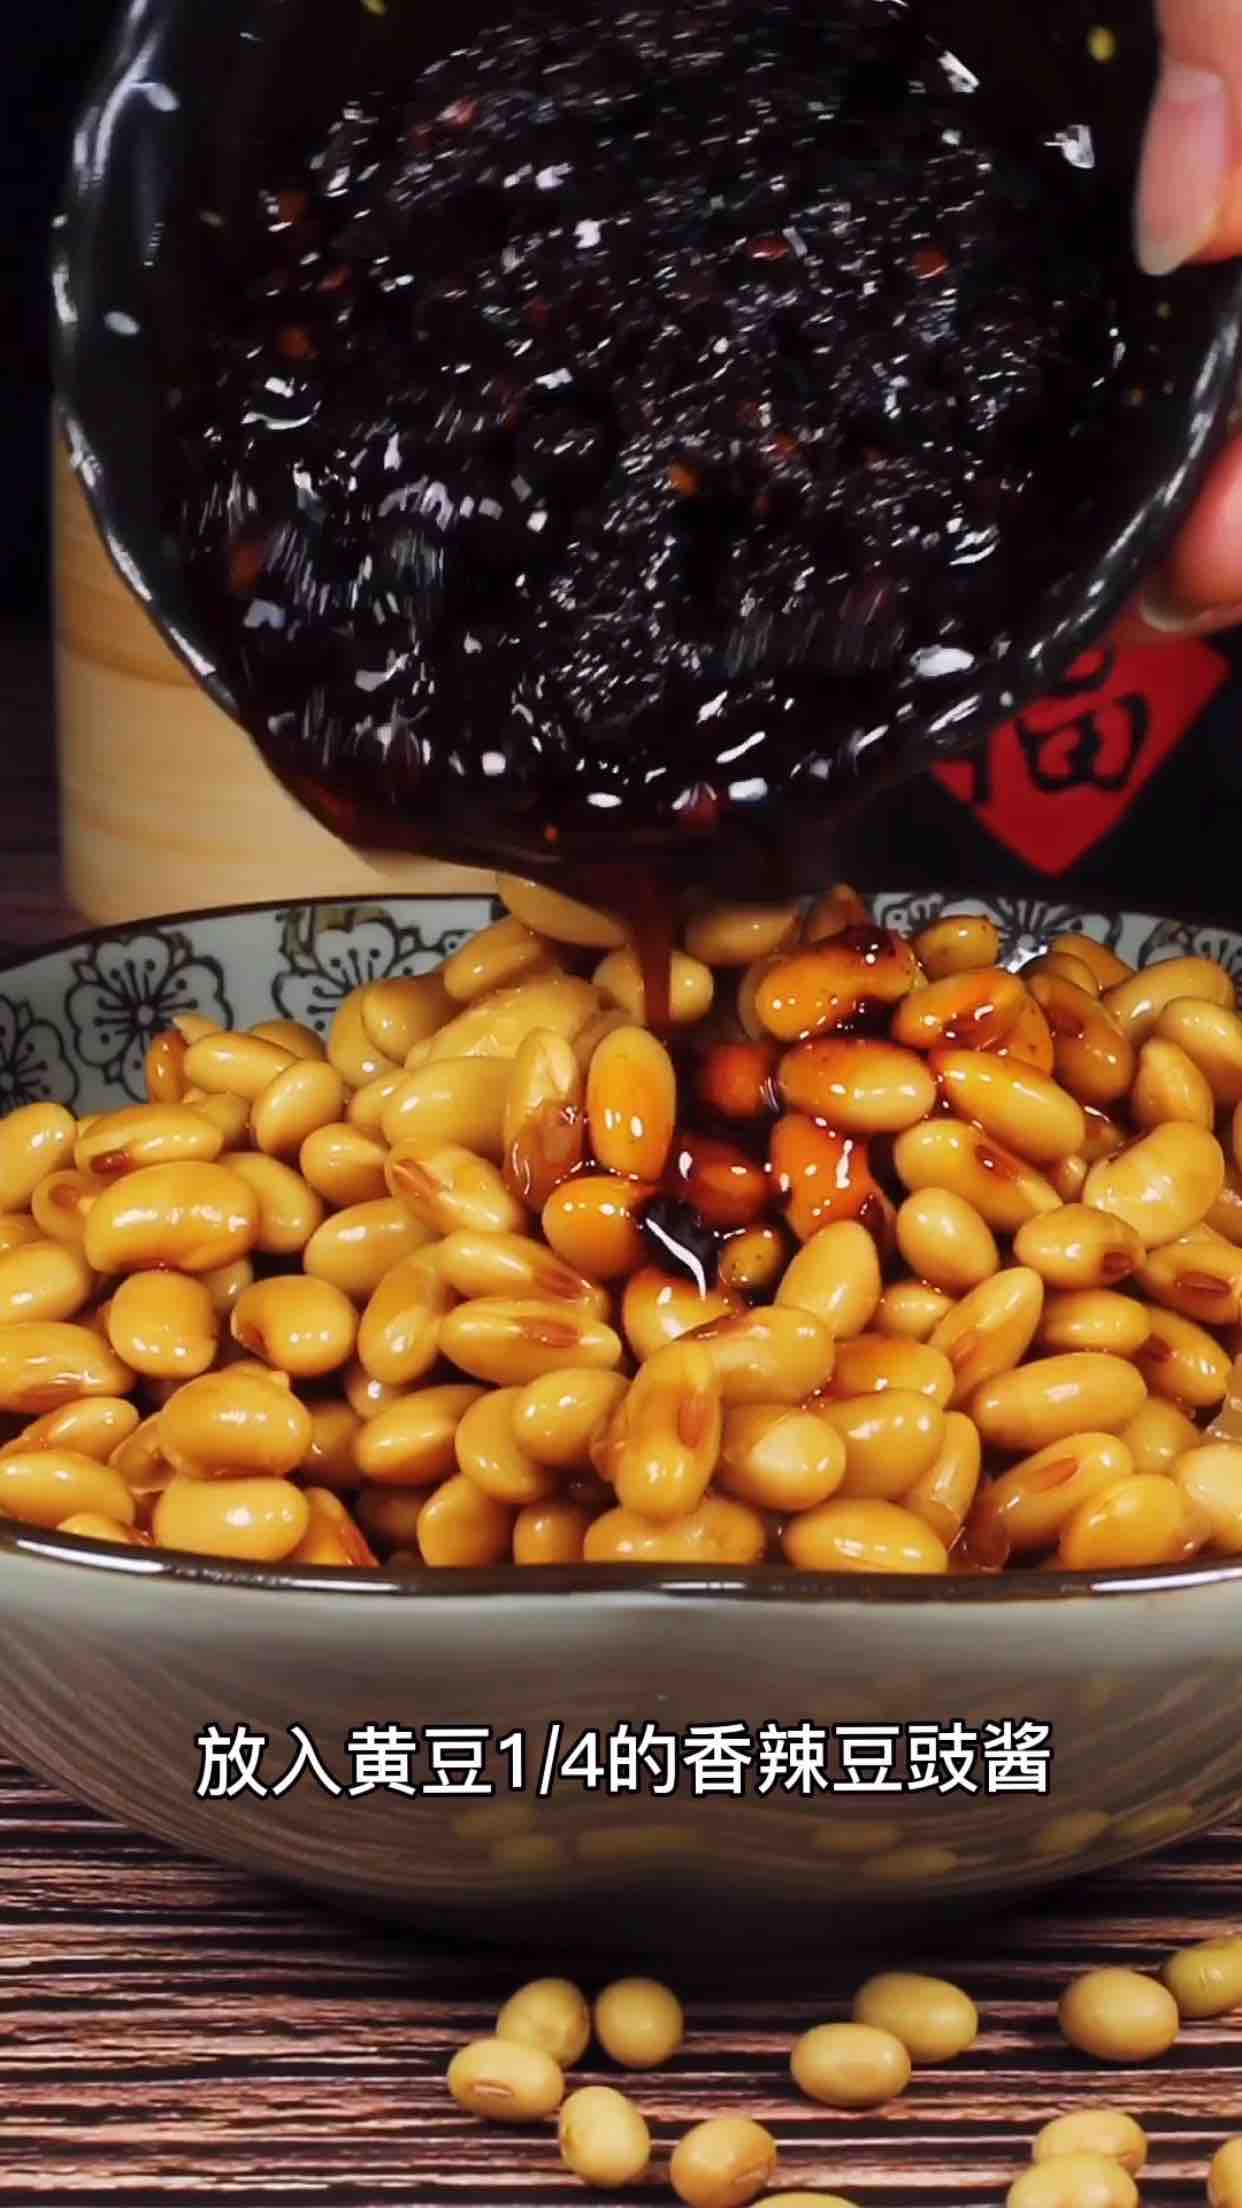 Spicy Soy Beans recipe